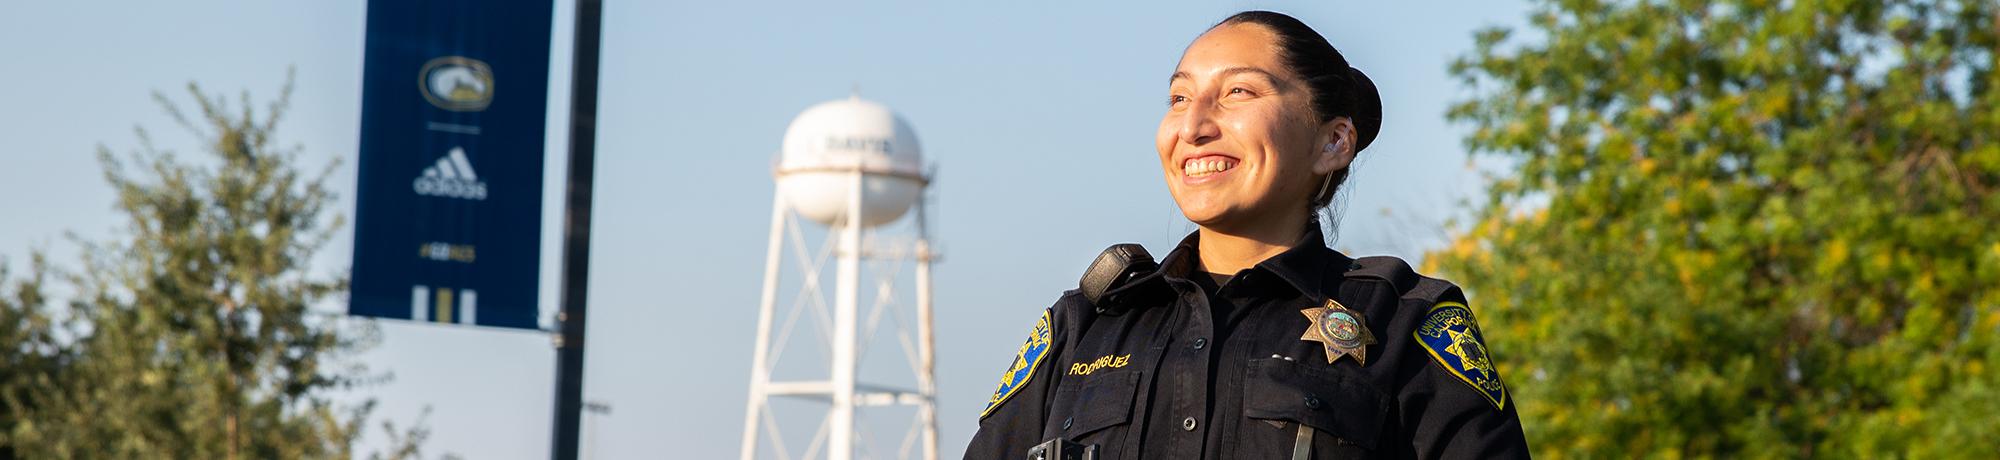 Officer smiles with UC Davis water tower in the background